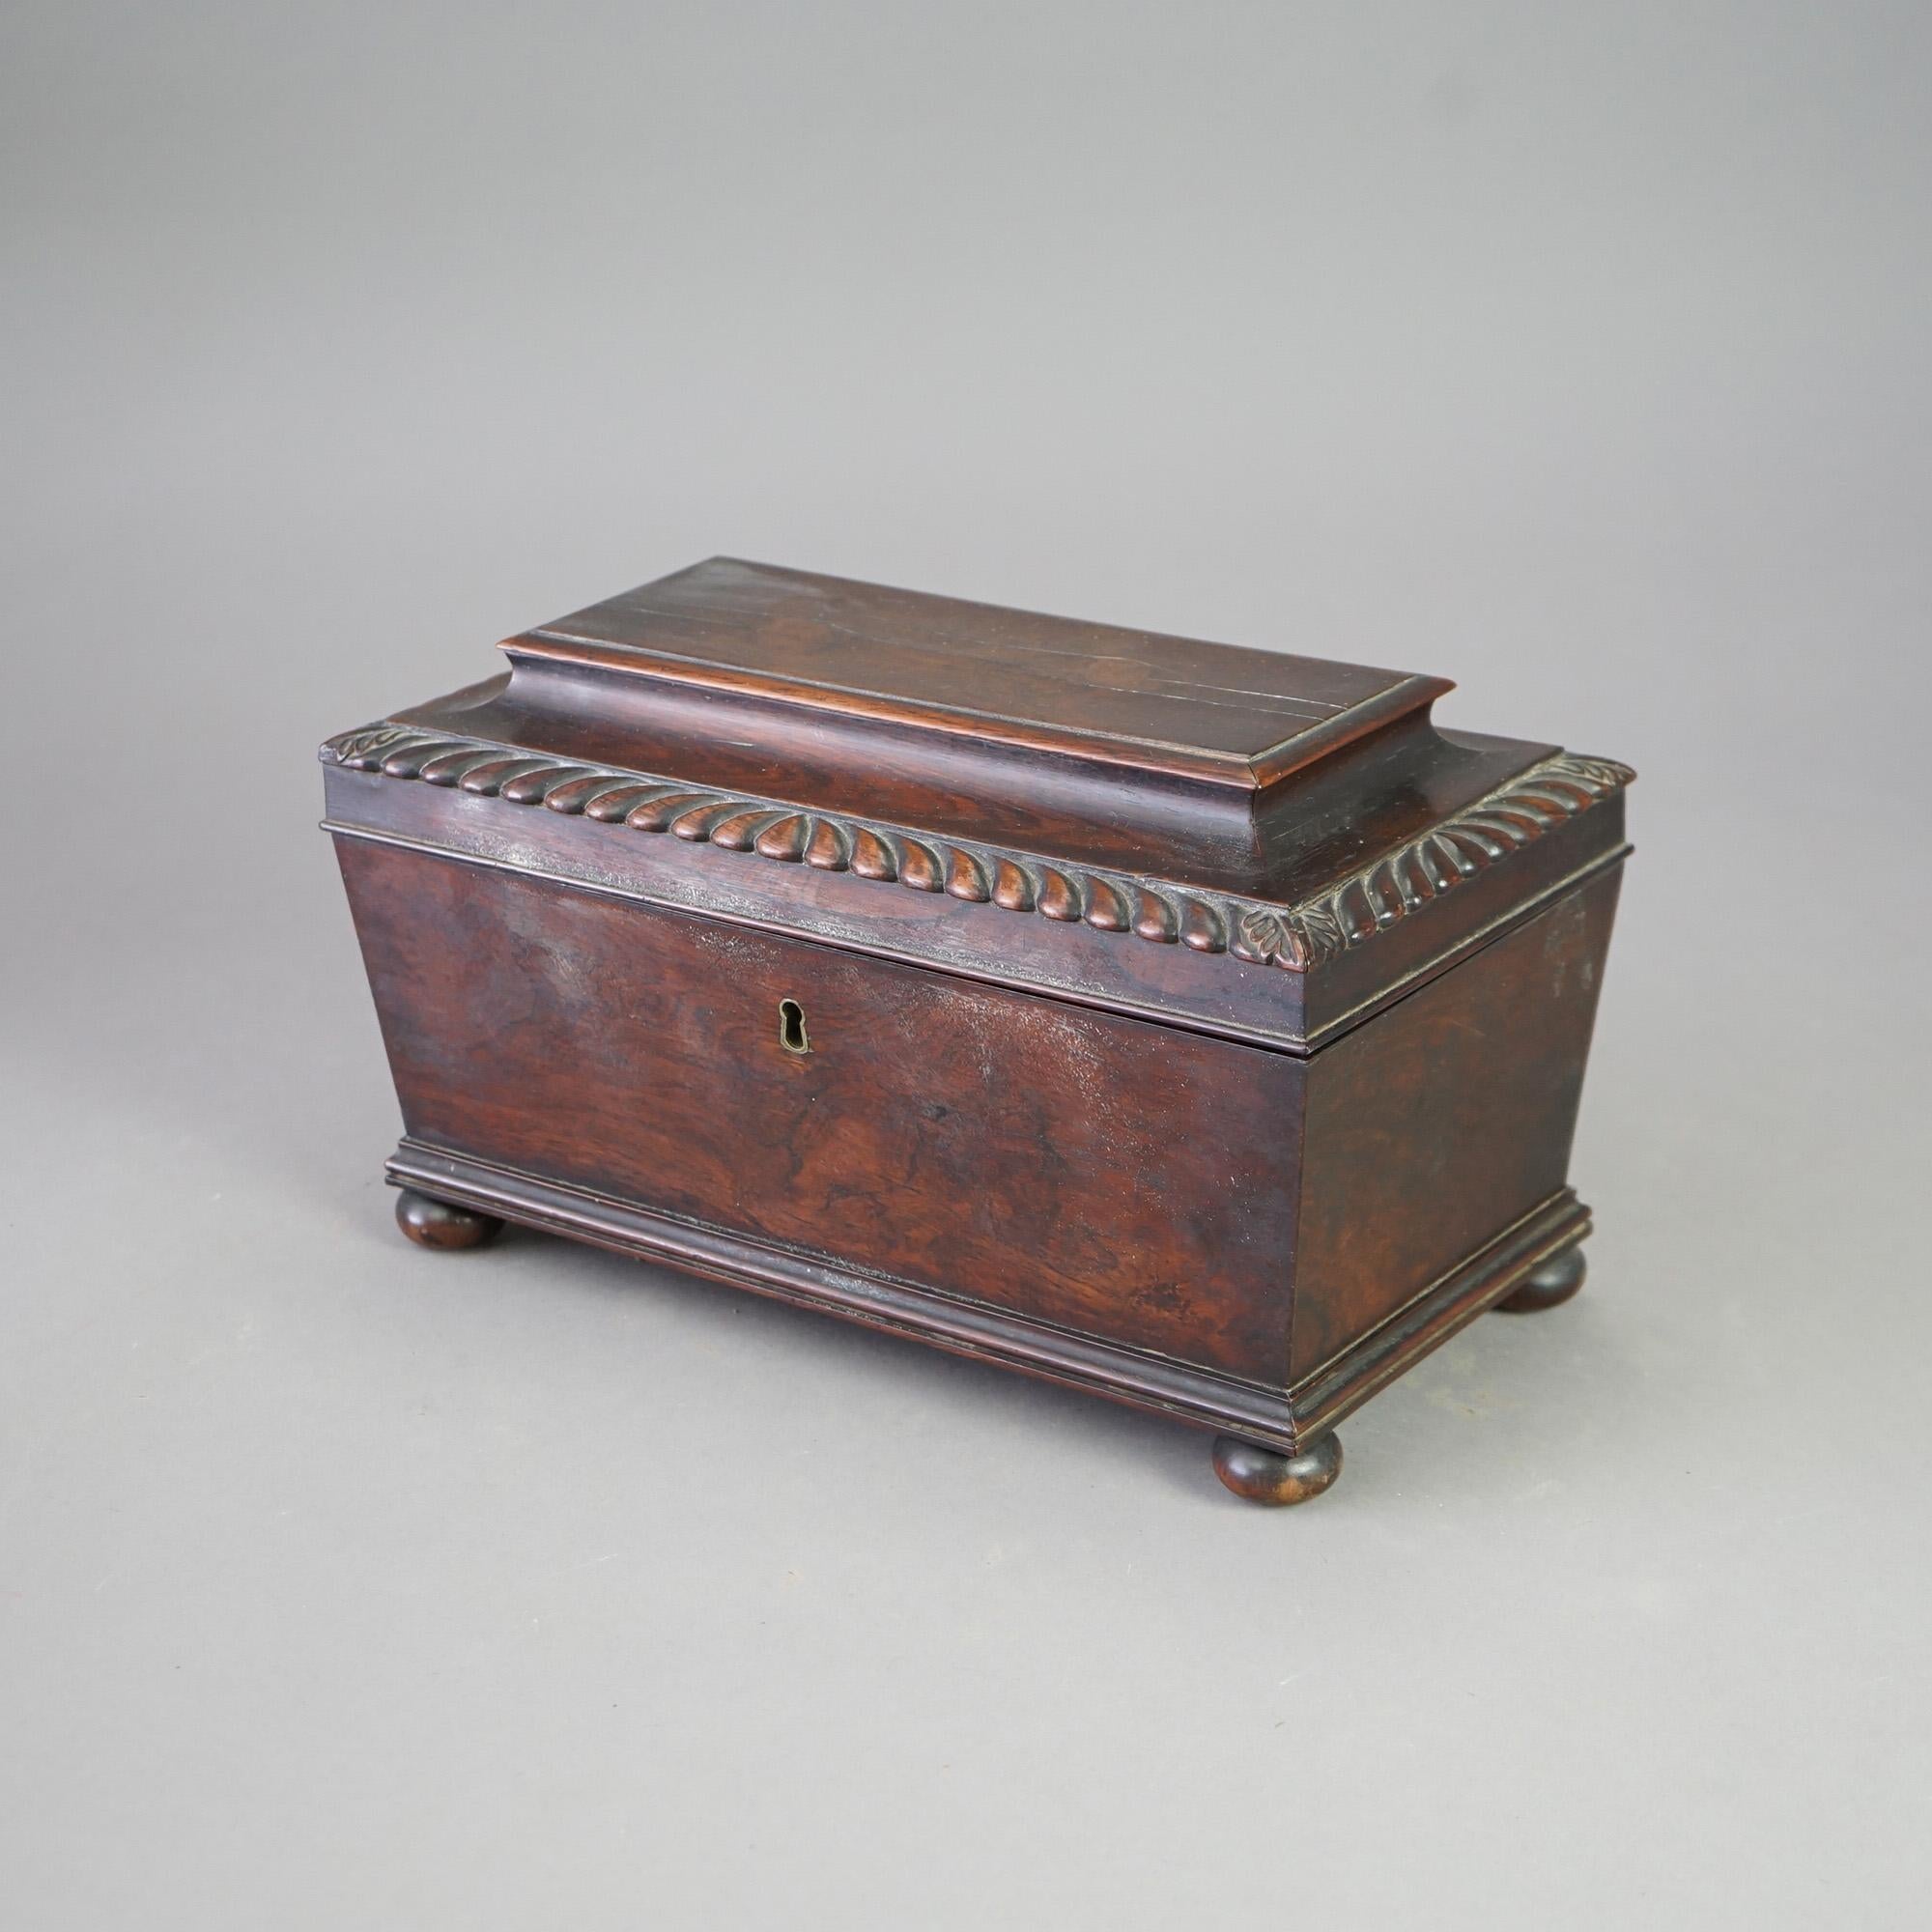 An antique English George III tea caddy offers rosewood construction in casket form with gadroon elements and raised on bun feet, c1820

Measures - 8